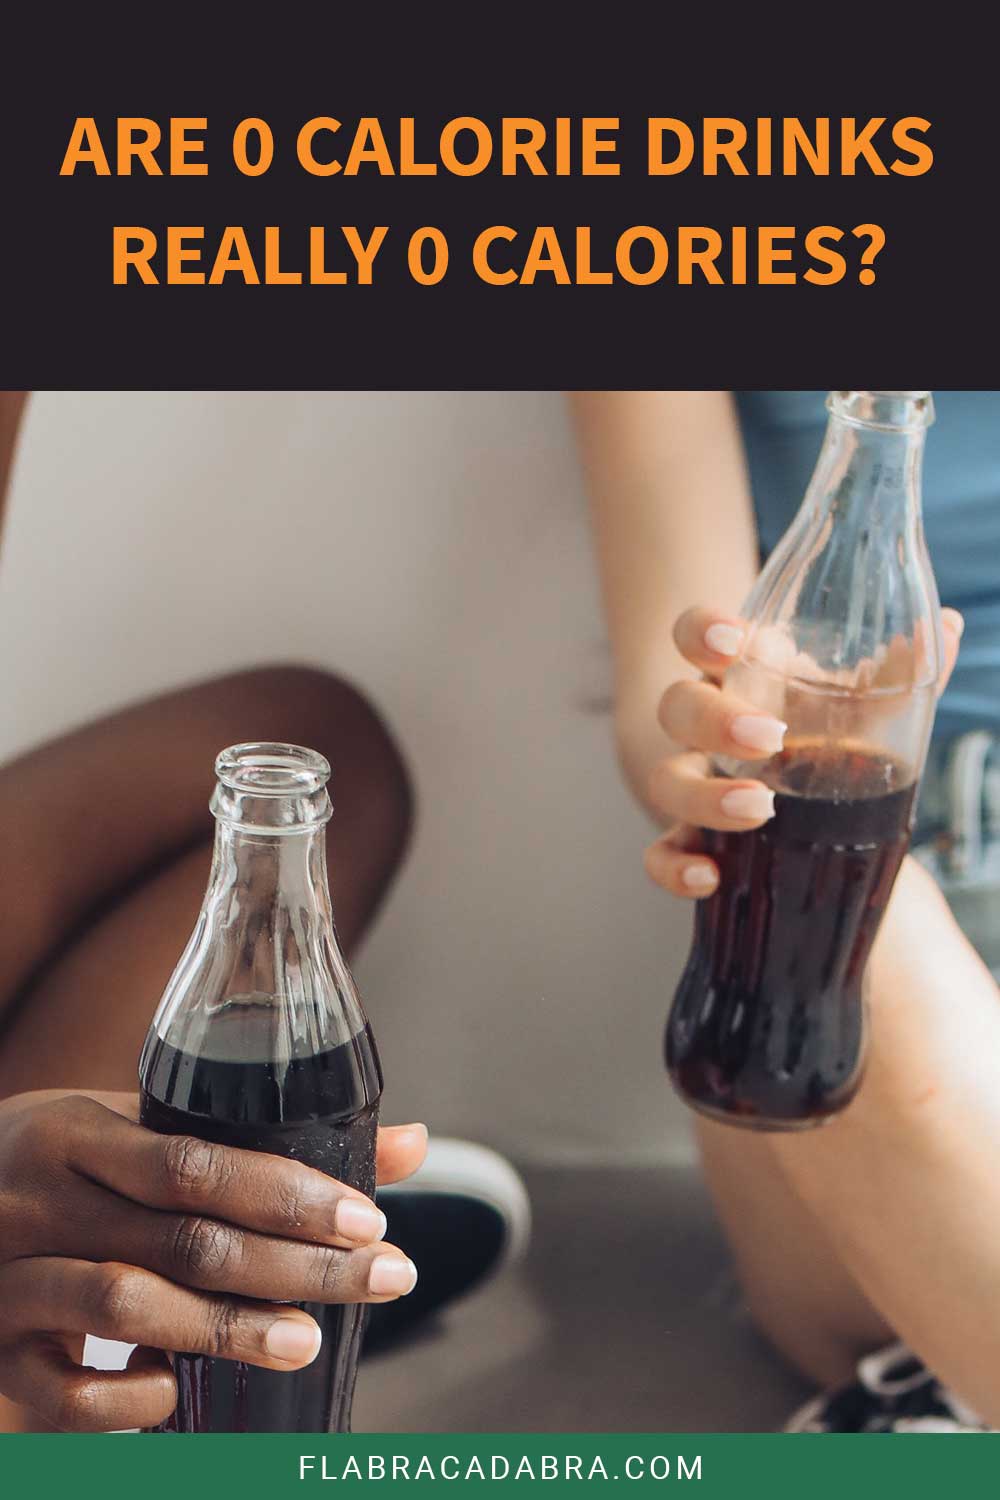 Are 0 Calorie Drinks Really 0 Calories?